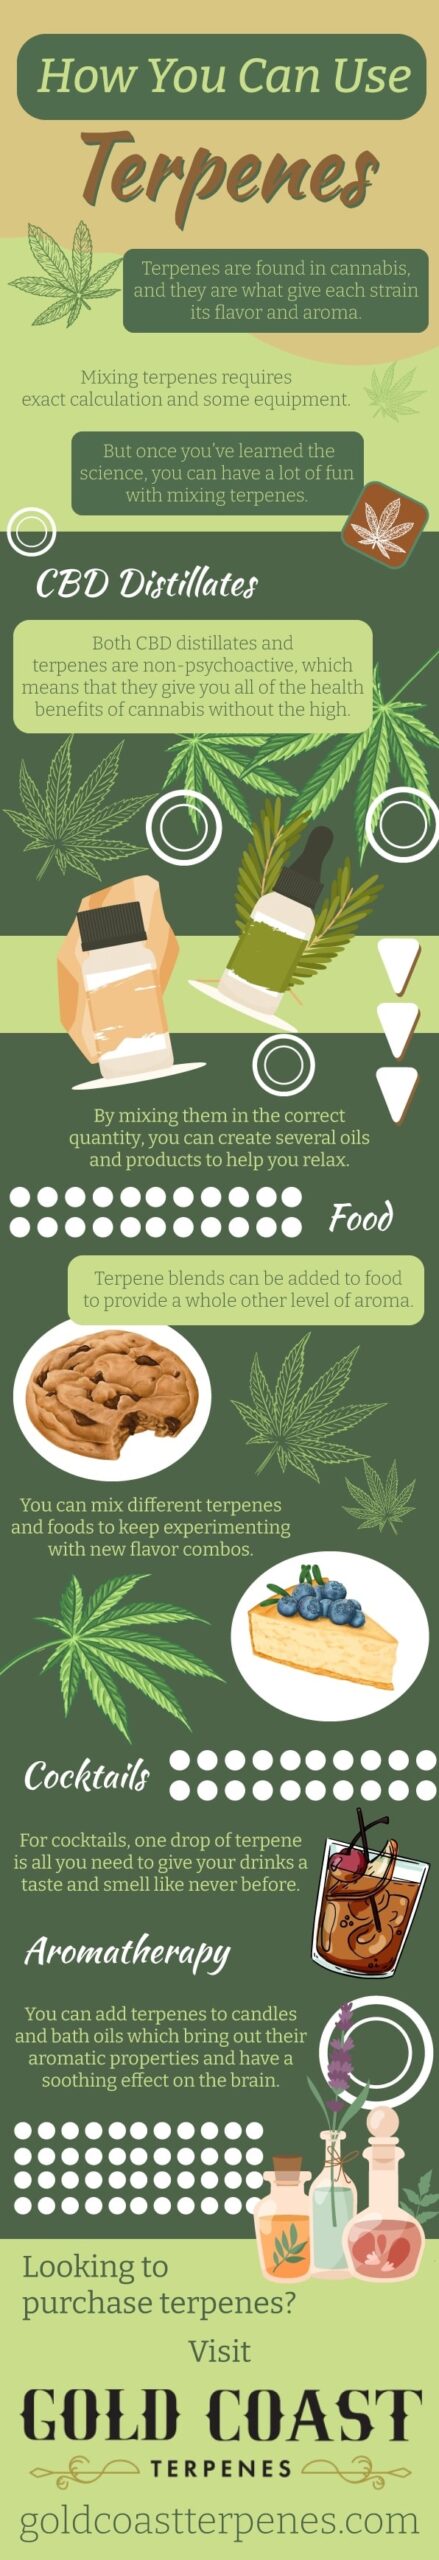 How You Can Use Terpenes